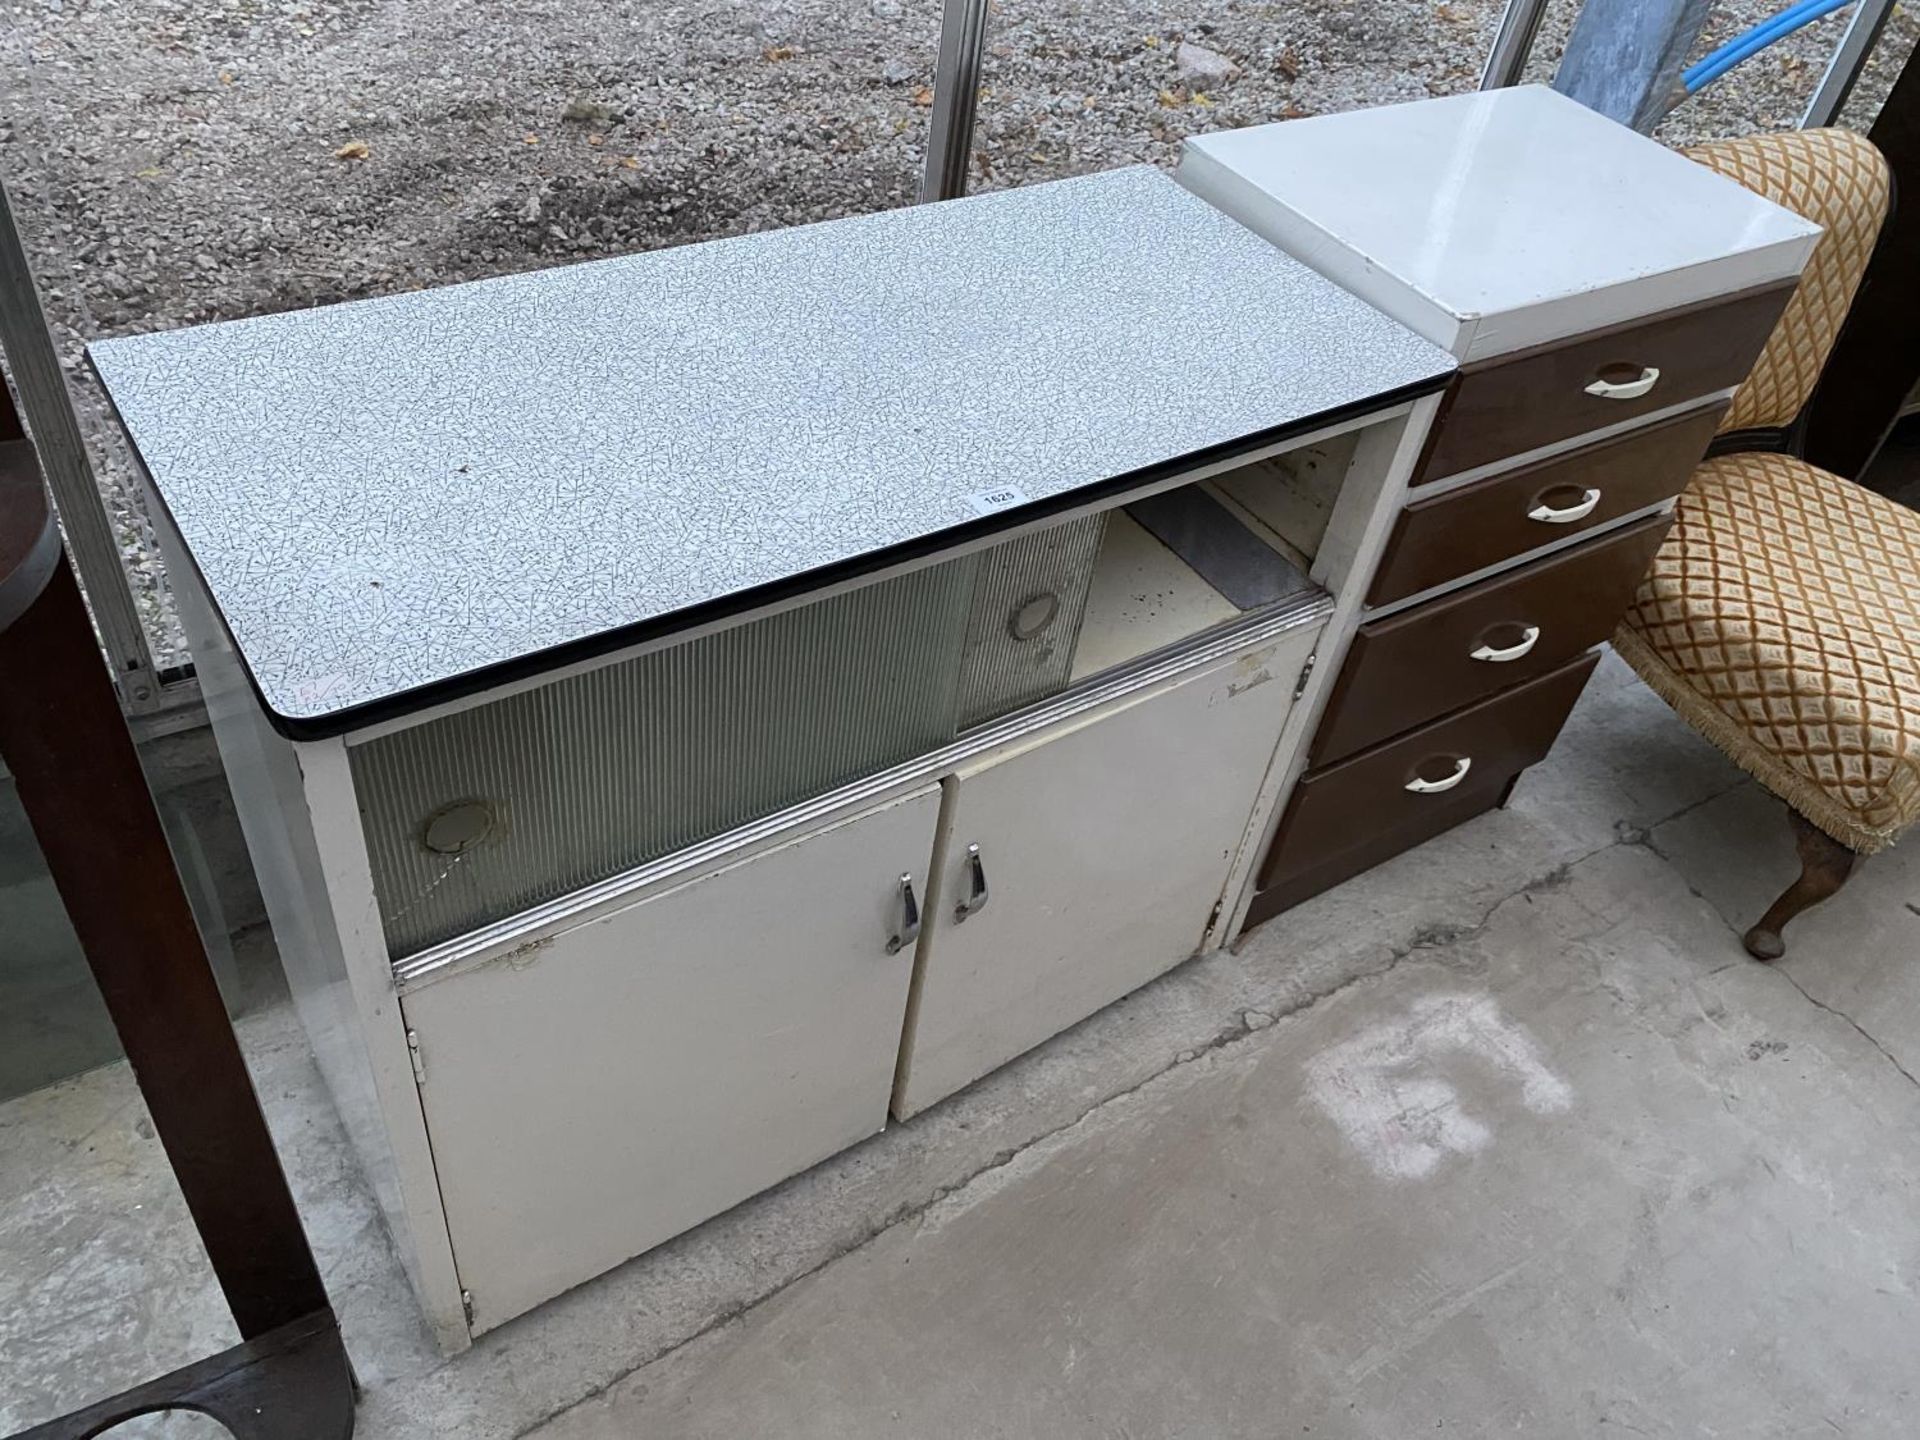 A 1950'S KITCHEN SIDE CABINET WITH CUPBOARDS AND SLIDING GLASS DOORS AND PAINTED FOUR DRAWER CHEST